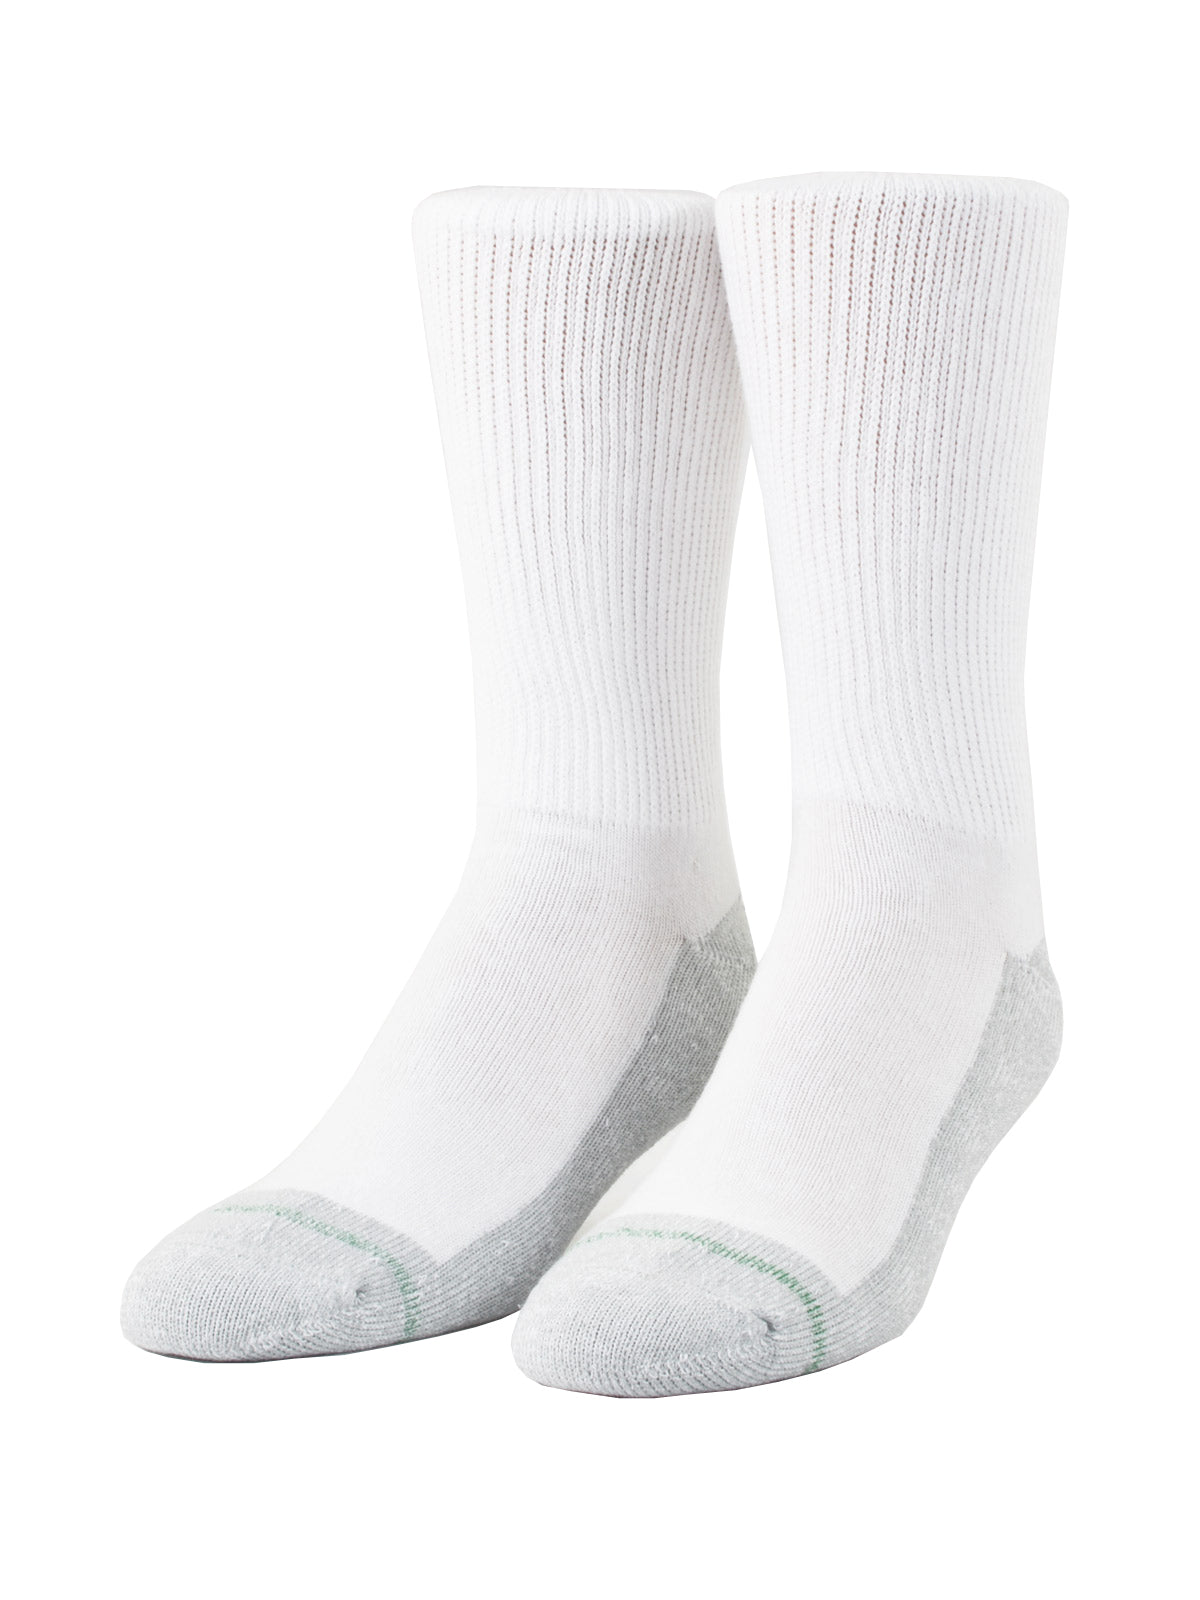 Loose Fit Stays Up Crew Athletic Socks in White - X-Large (Size 15.5 - 19) - 720